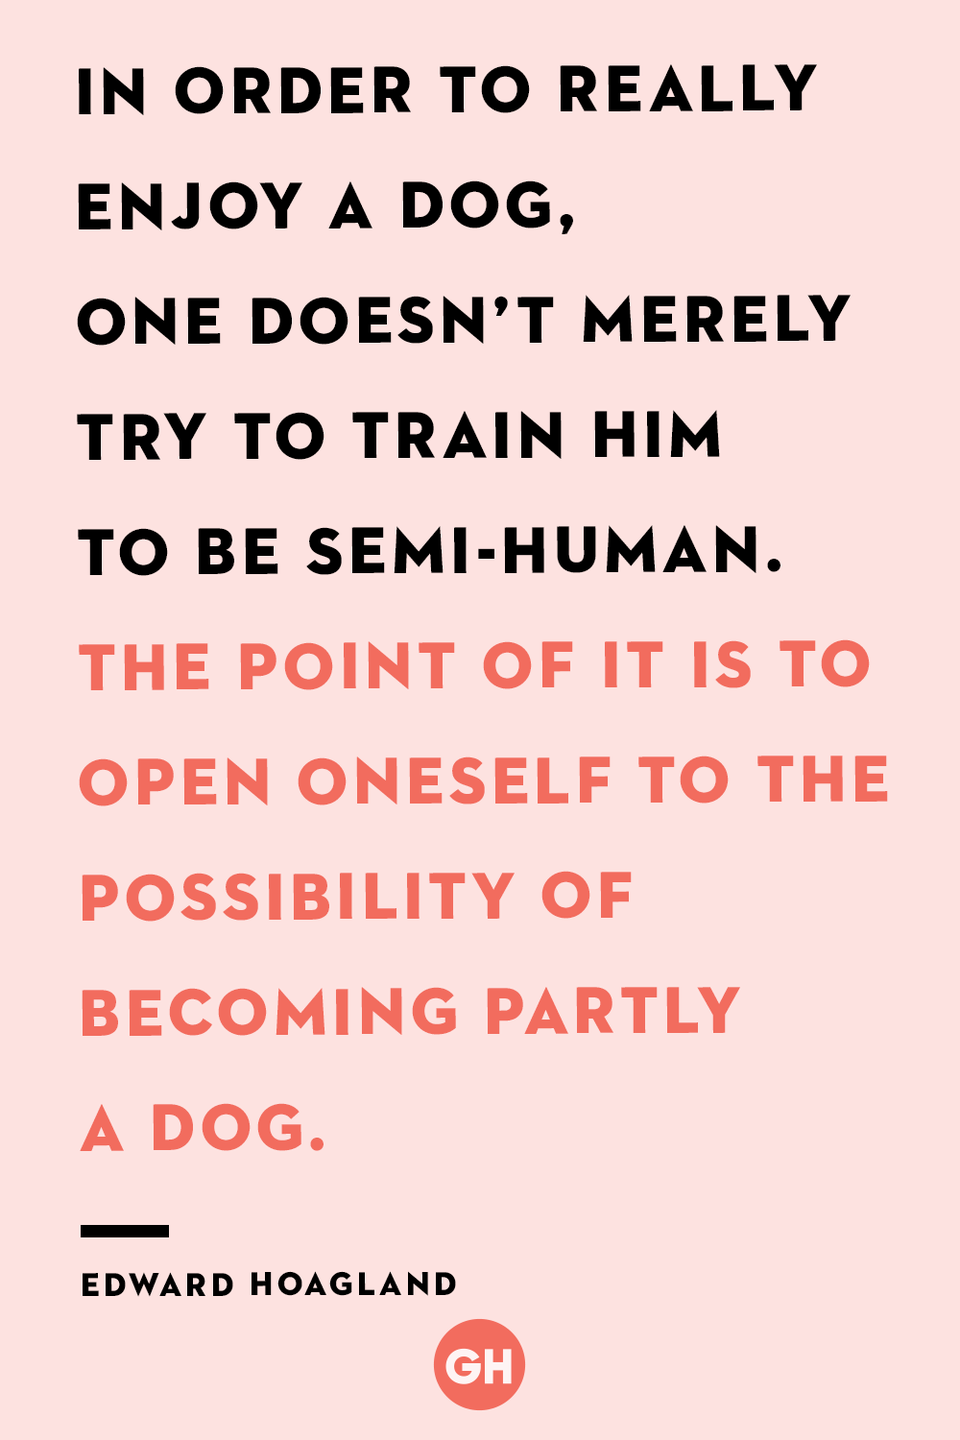 50 Dog Quotes That'll Inspire You to Hug Your Pup a Little Tighter